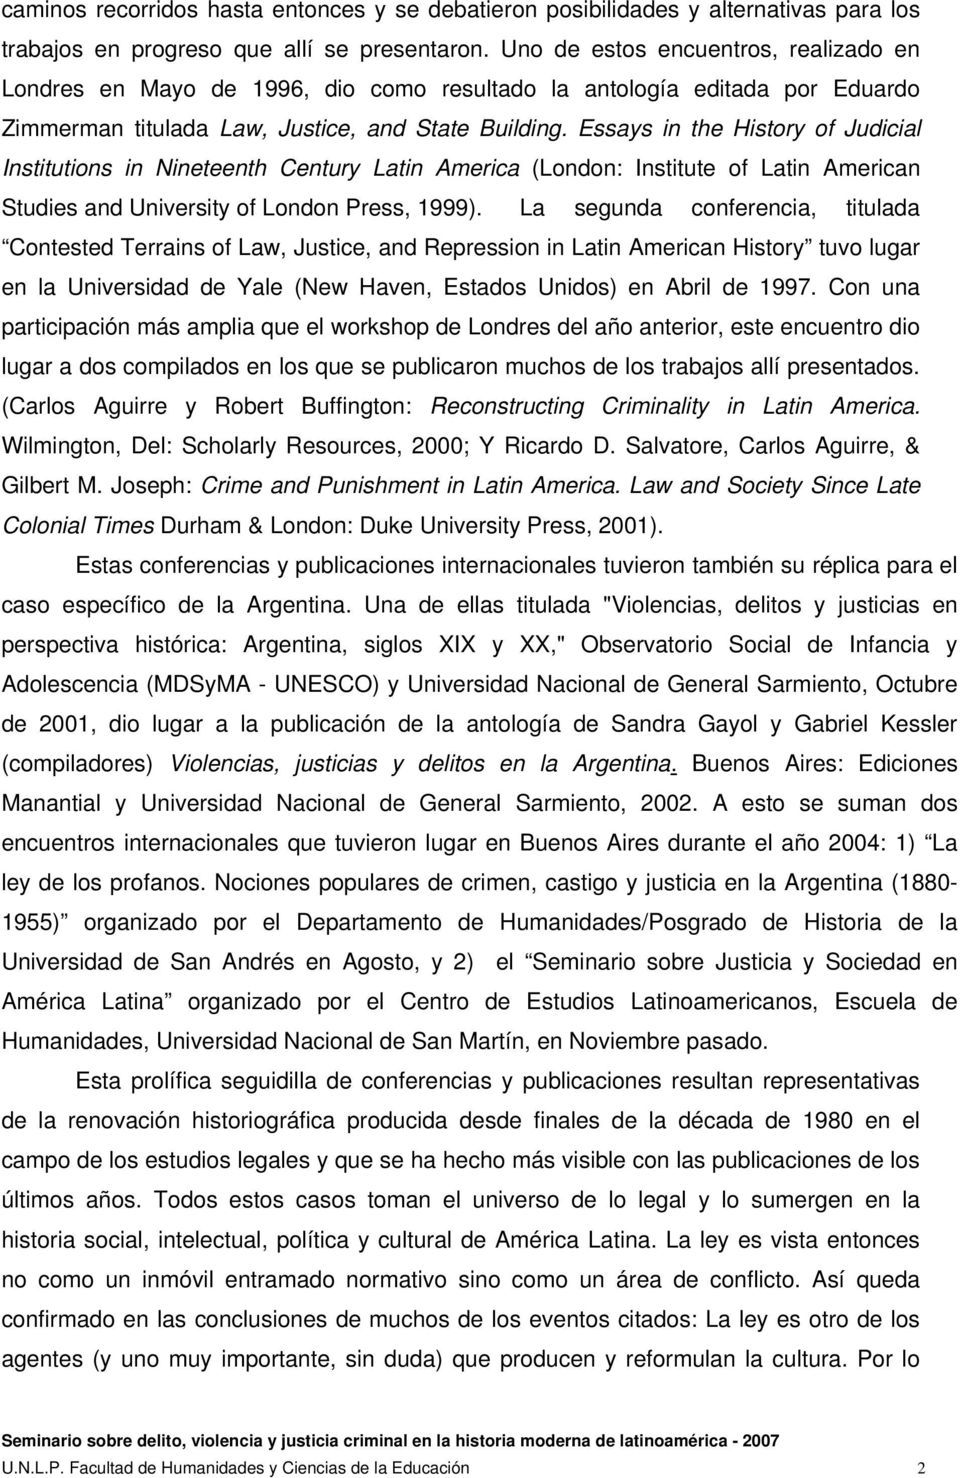 Essays in the History of Judicial Institutions in Nineteenth Century Latin America (London: Institute of Latin American Studies and University of London Press, 1999).